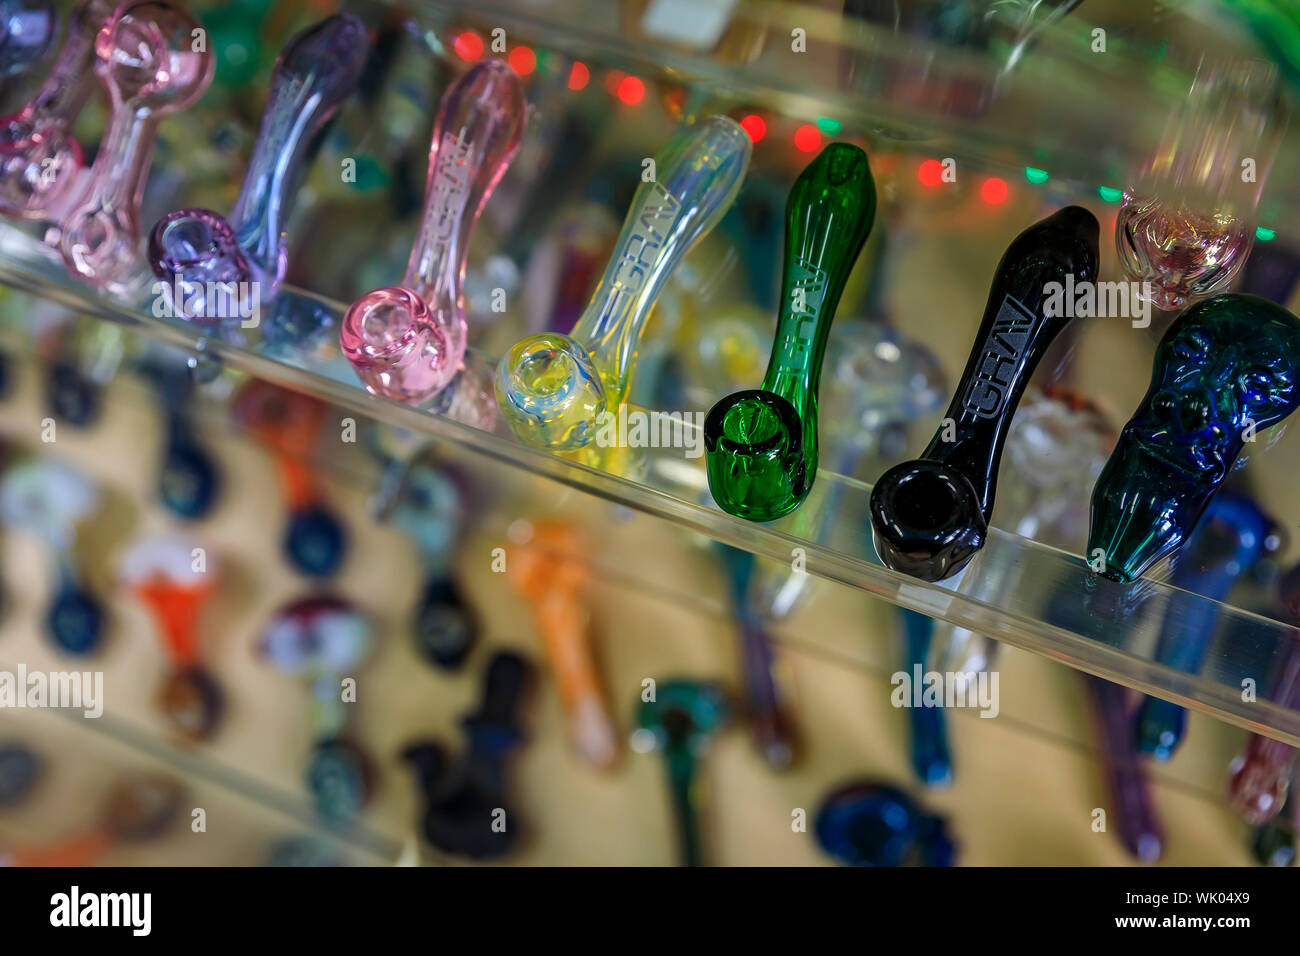 San Francisco, USA - July 04, 2019: Display Of Glass Bongs For Smoking  Medicinal And Recreational Marijuana Or Weed, Pot In A Haight Ashbury Store  Stock Photo, Picture and Royalty Free Image. Image 134379975.